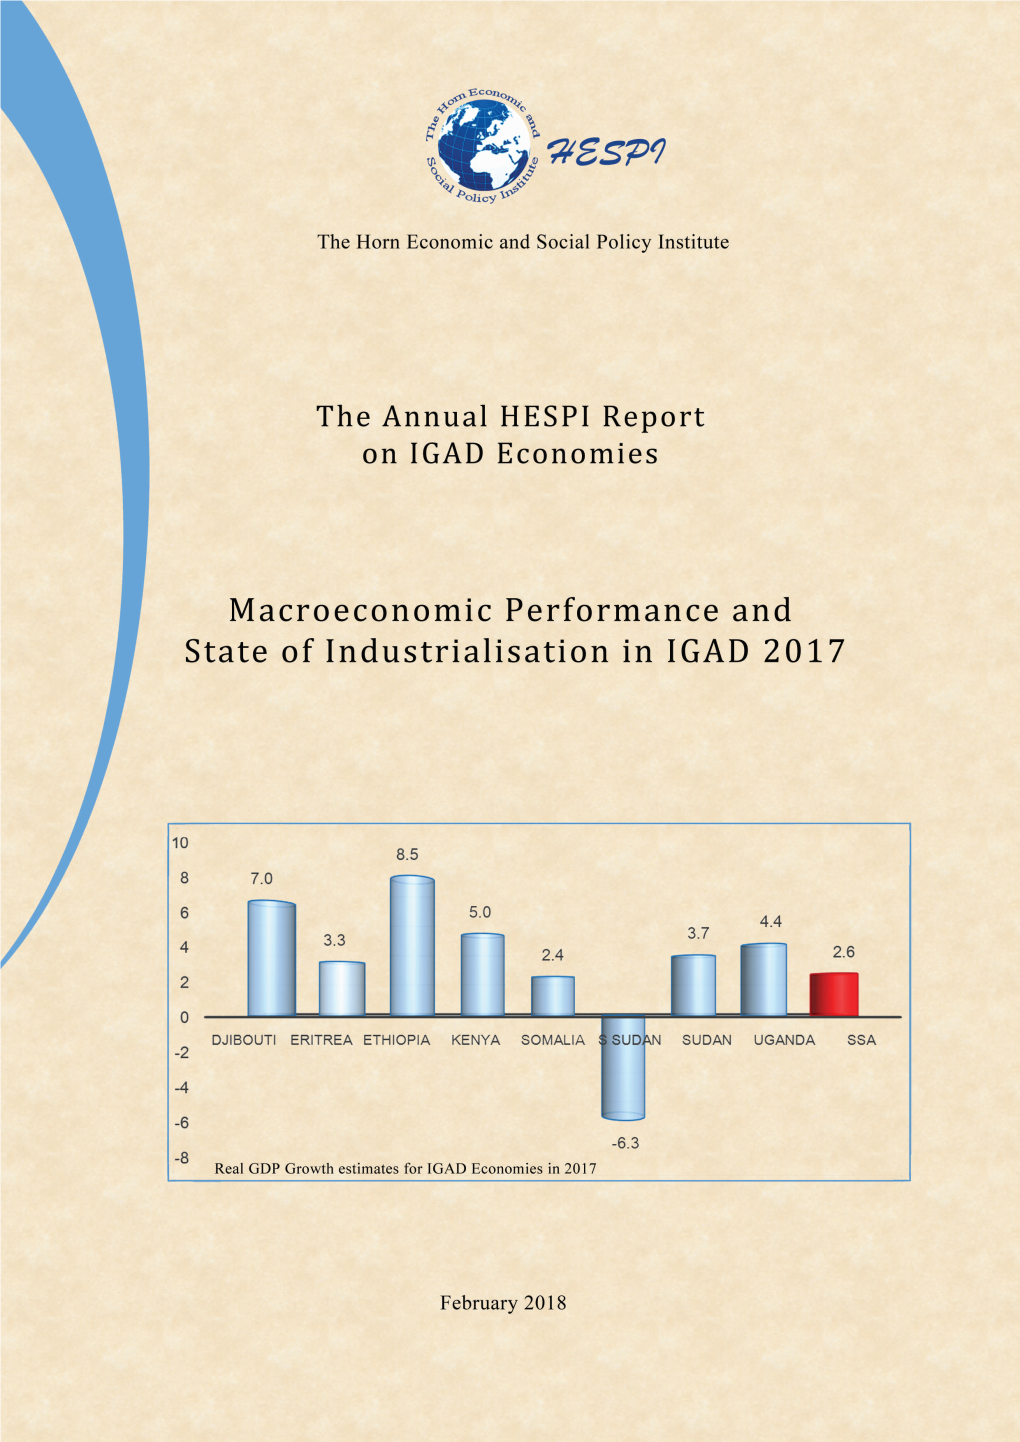 Macroeconomic Performance and Status of Industrialization in IGAD